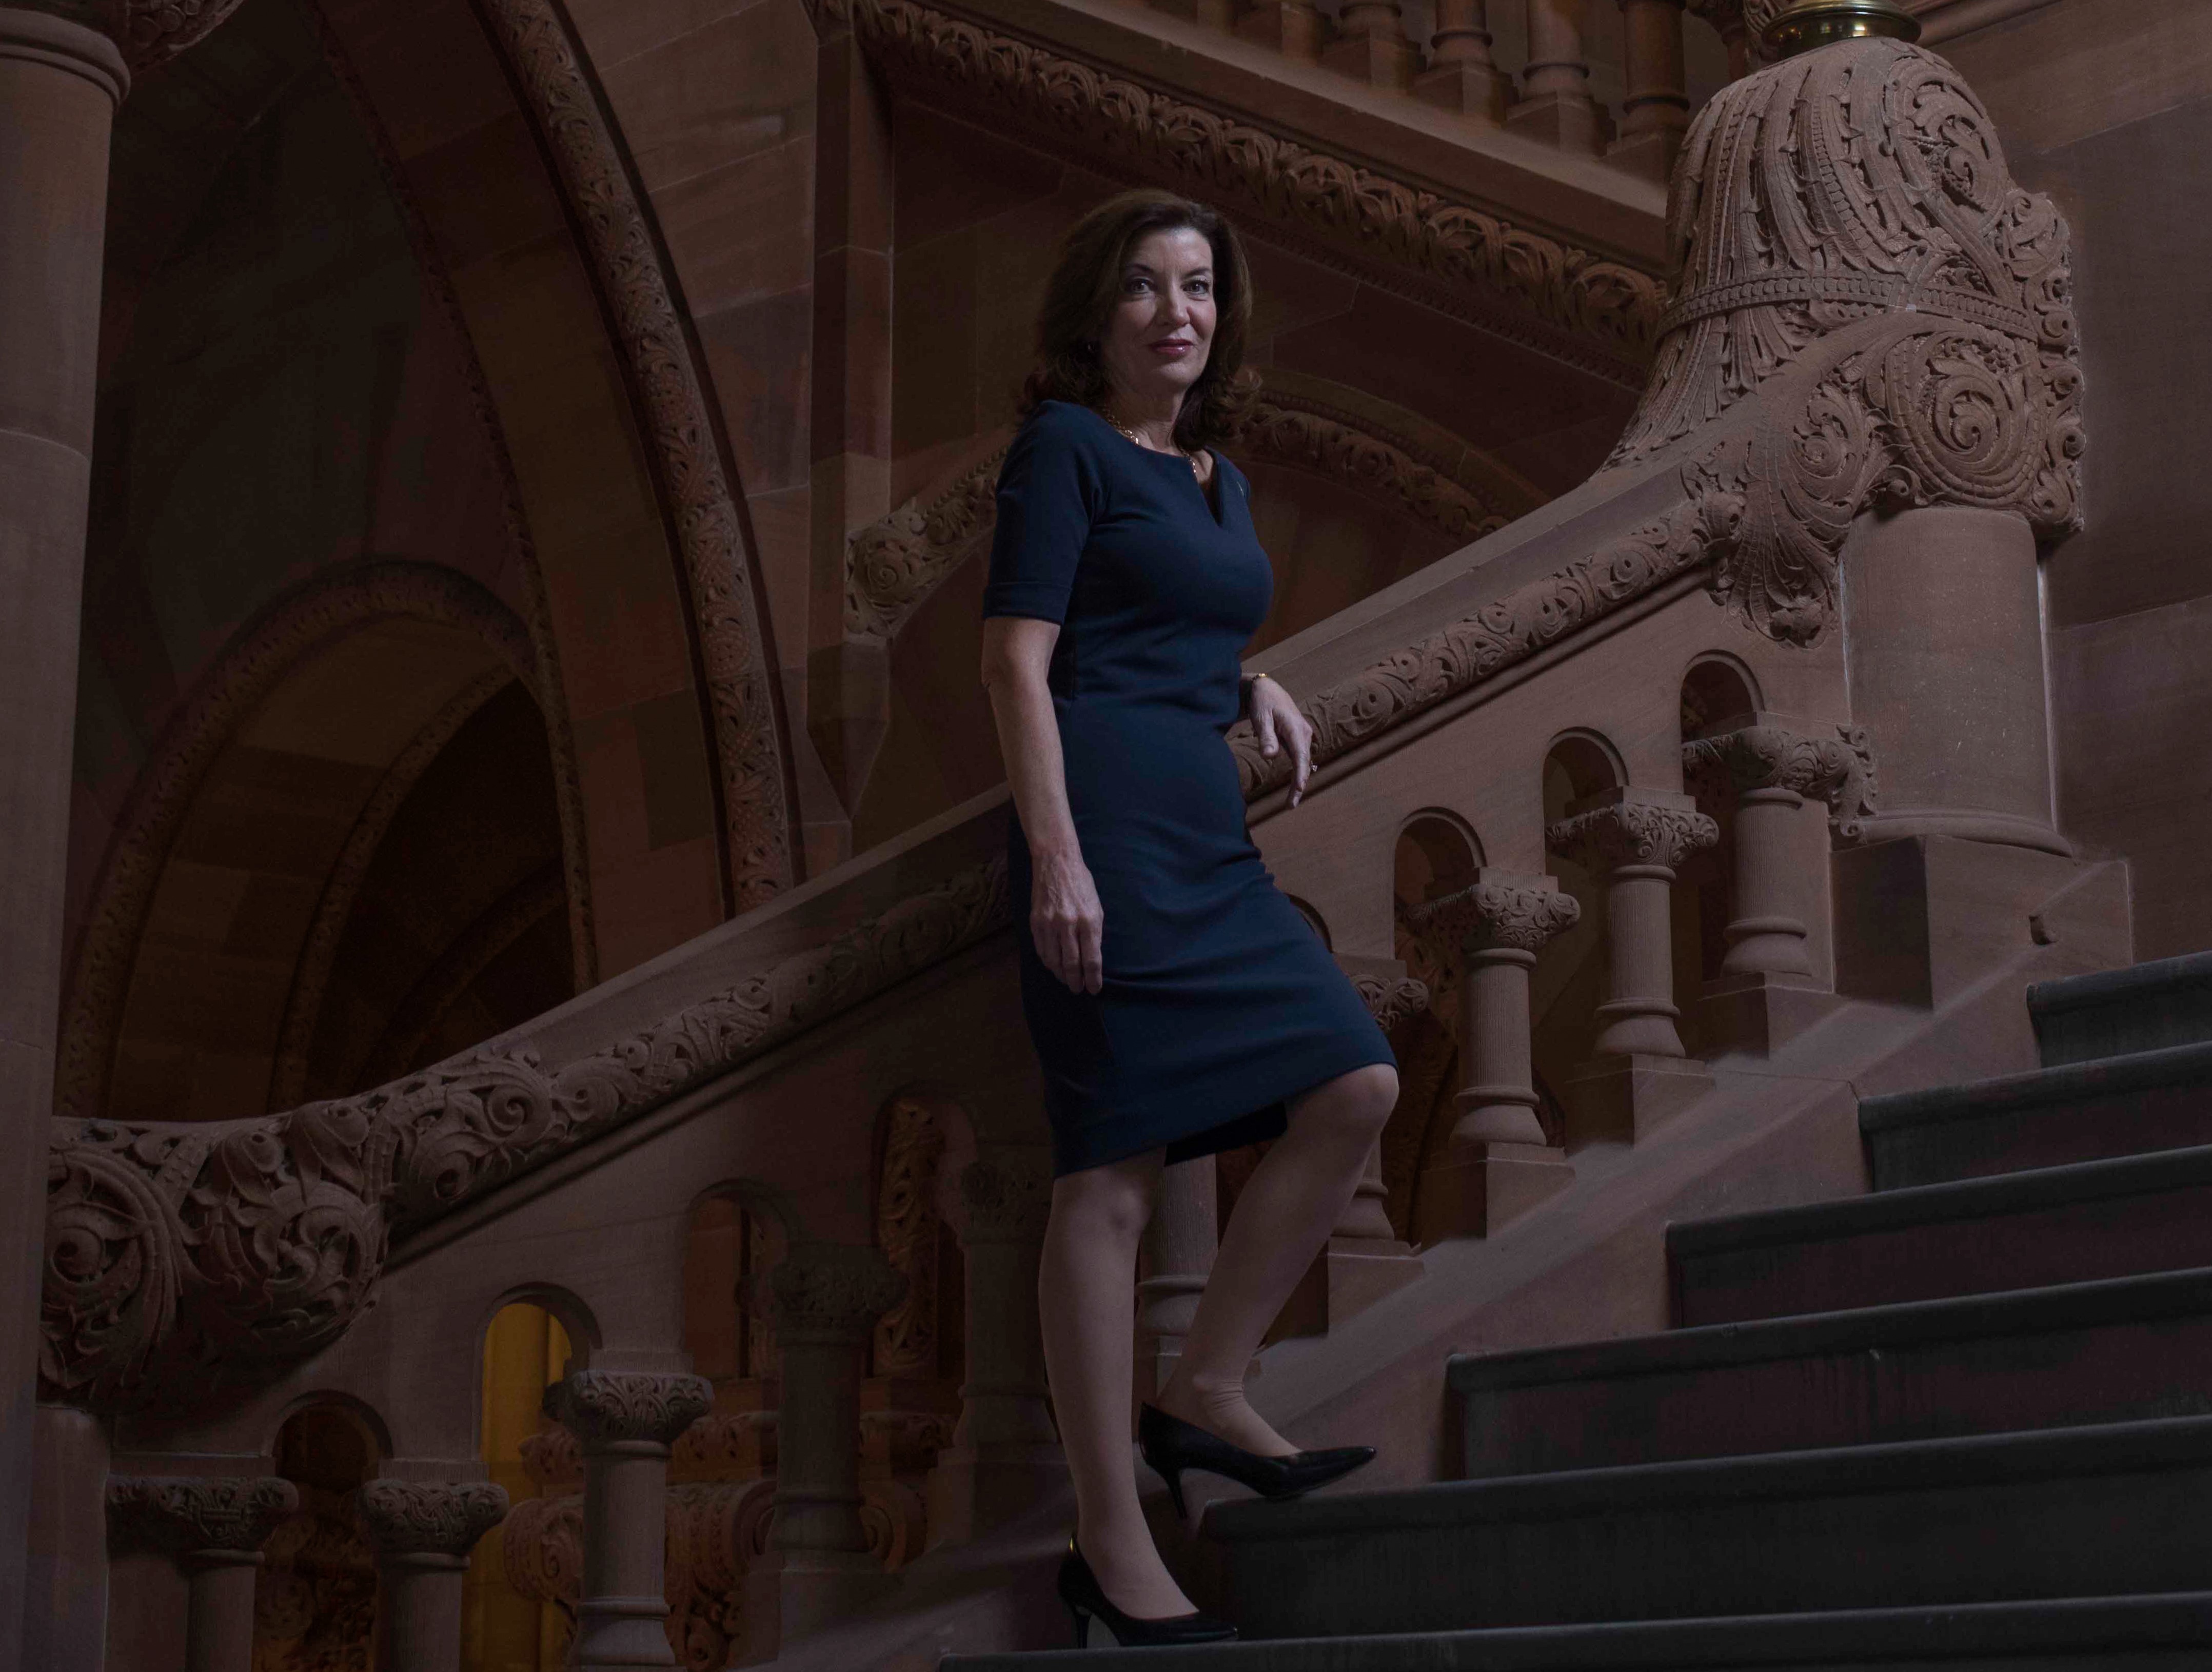 Lt. Gov. Kathy Hochul on the Million Dollar Staircase at the state Capitol in Albany